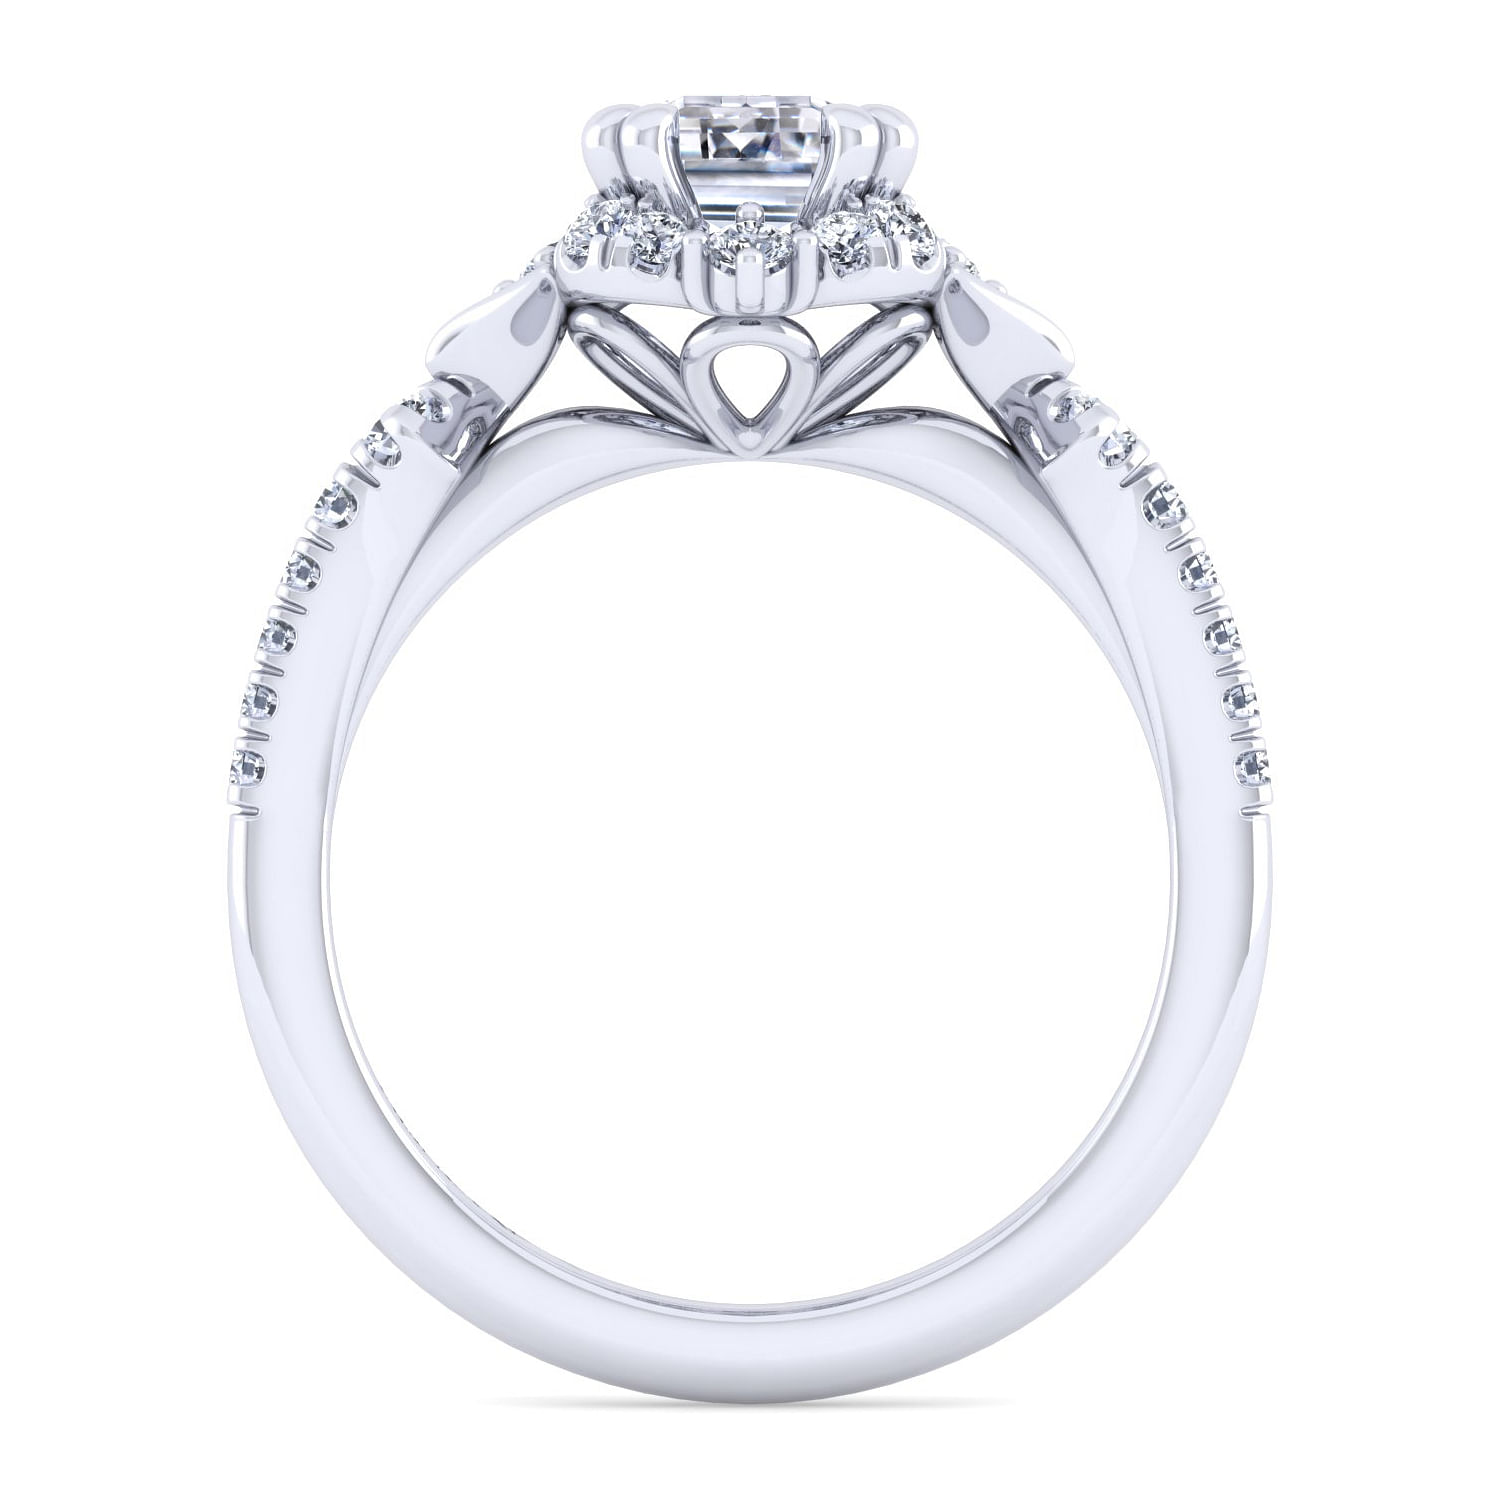 Unique 14K White Gold Vintage Inspired Emerald Cut Halo Diamond Engagement Ring